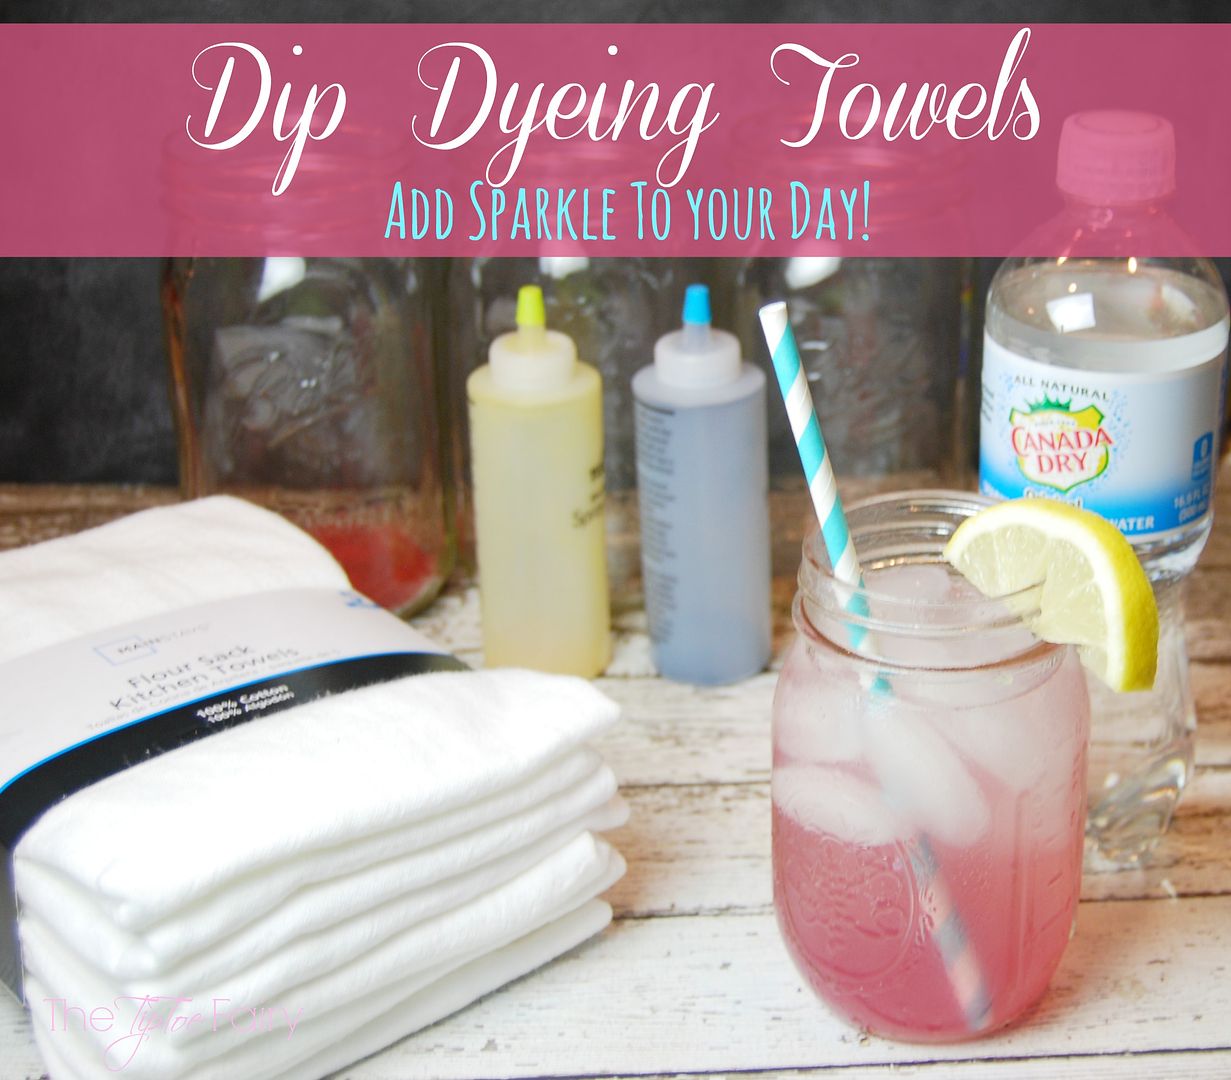 Dip Dyeing Towels Tutorial | The TipToe Fairy #AddSparkle  #shop #crafttutorial #dyetutorial